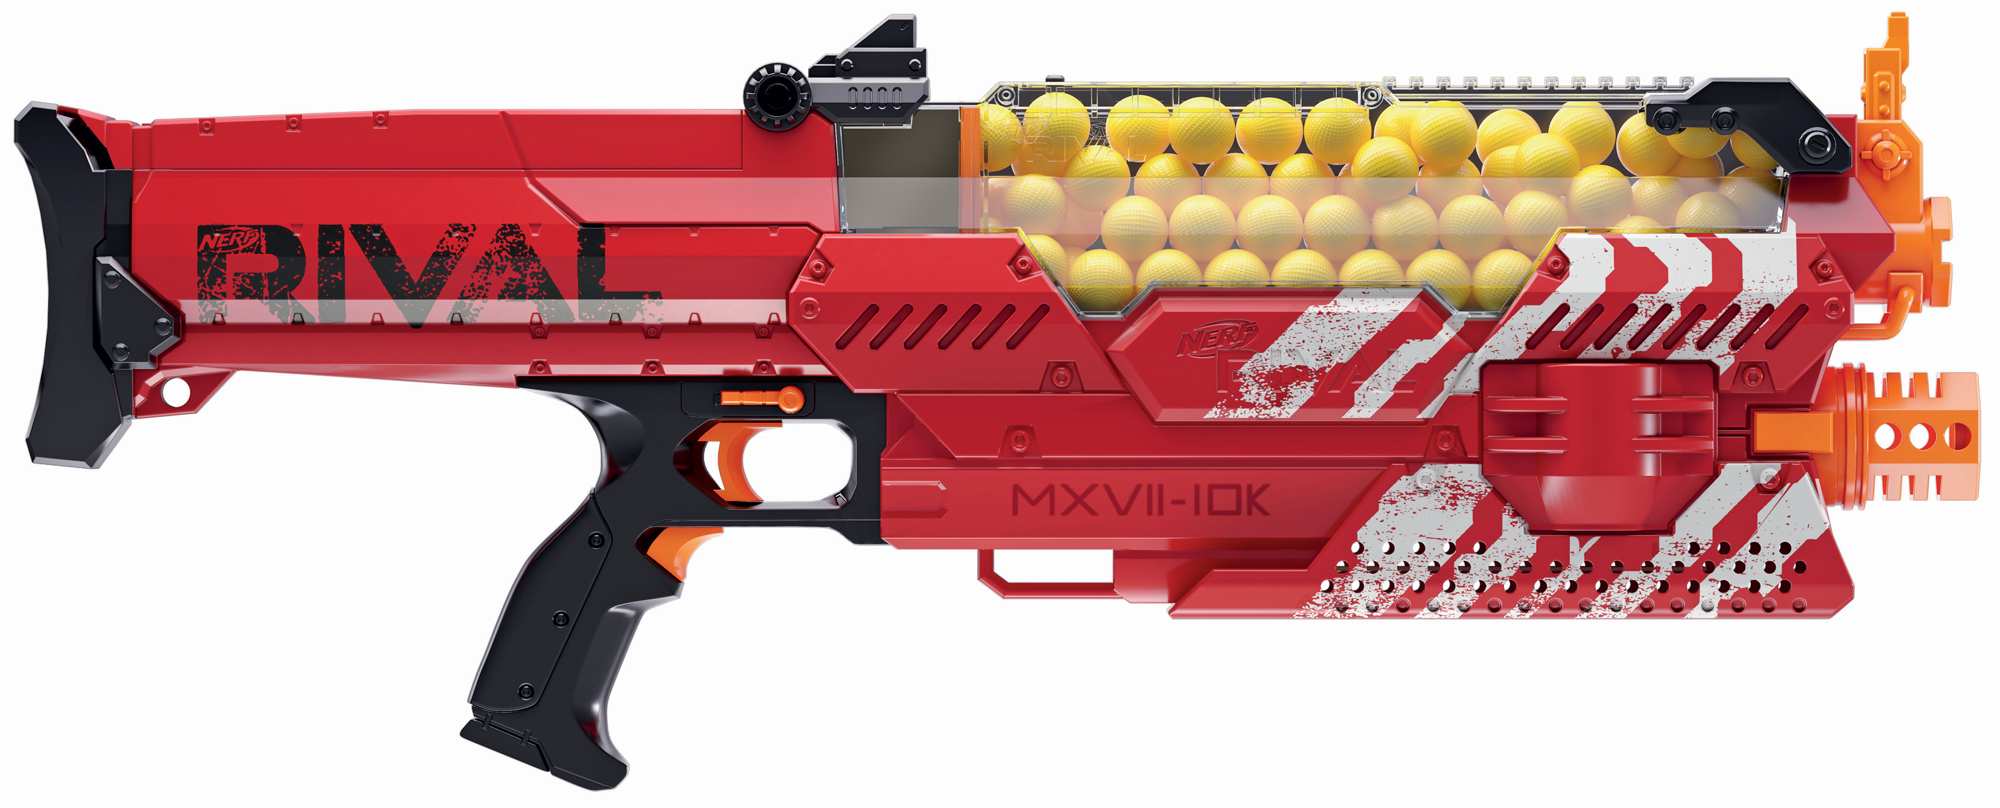 Nerf’s Colossal New Gun Blasts 100 Rounds At 112KM/H